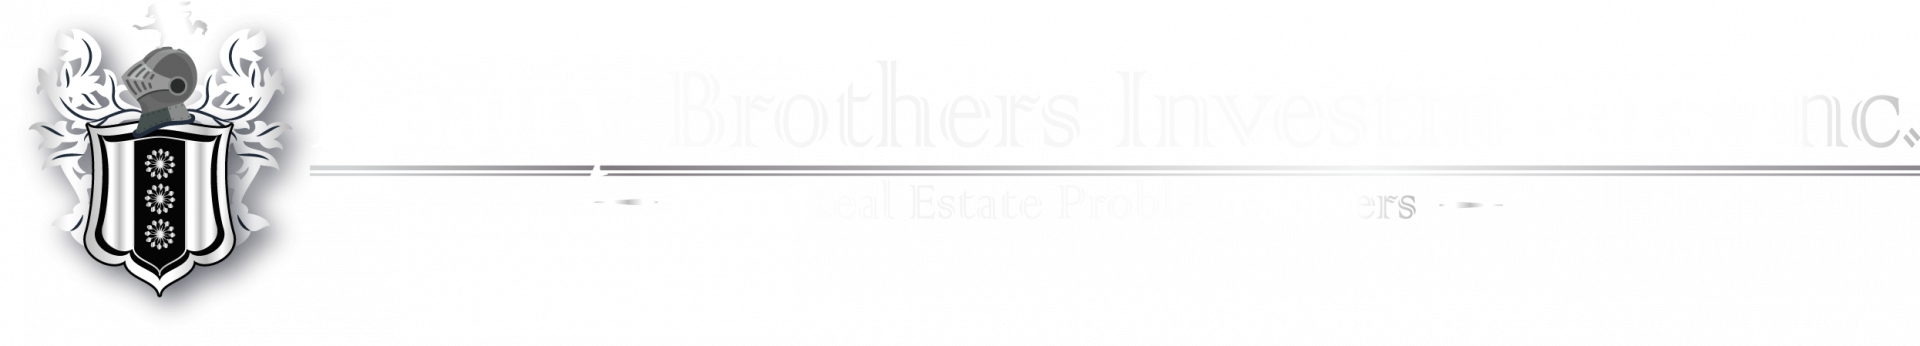 Realty Brothers Investments Inc.  logo